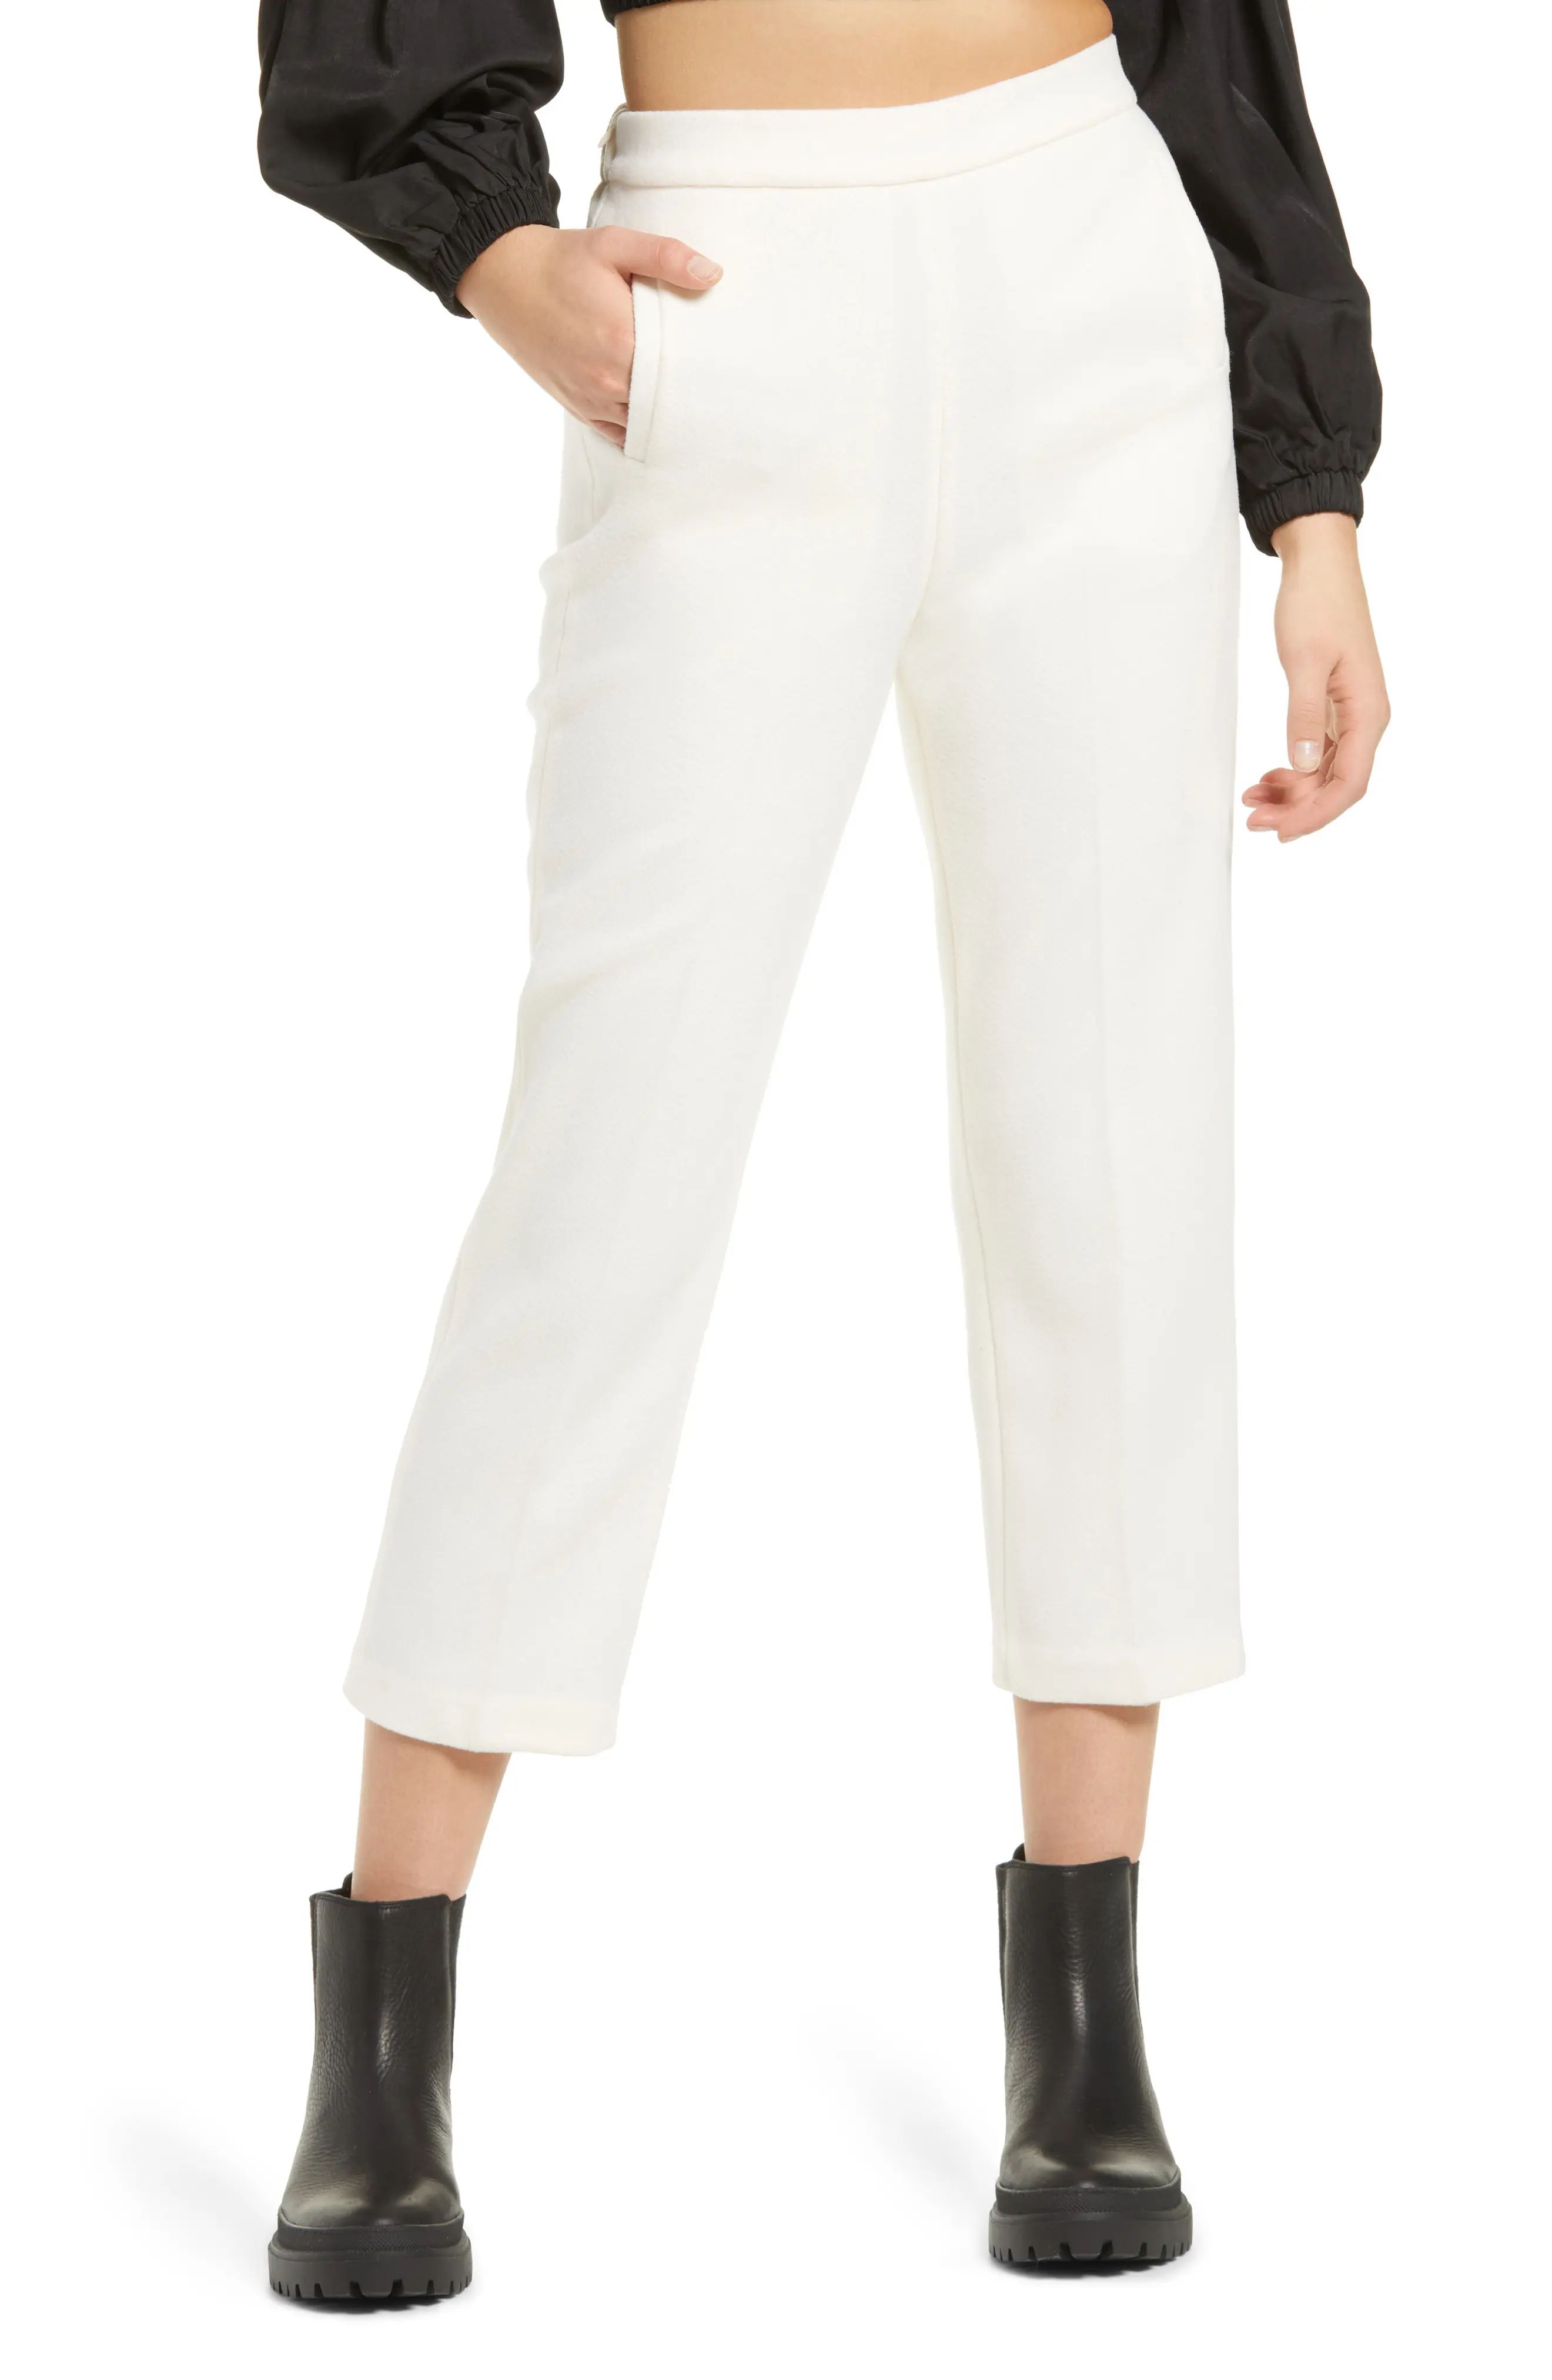 Women's Amy Lynn Cecily Crop Trousers, Size Medium - White | Nordstrom